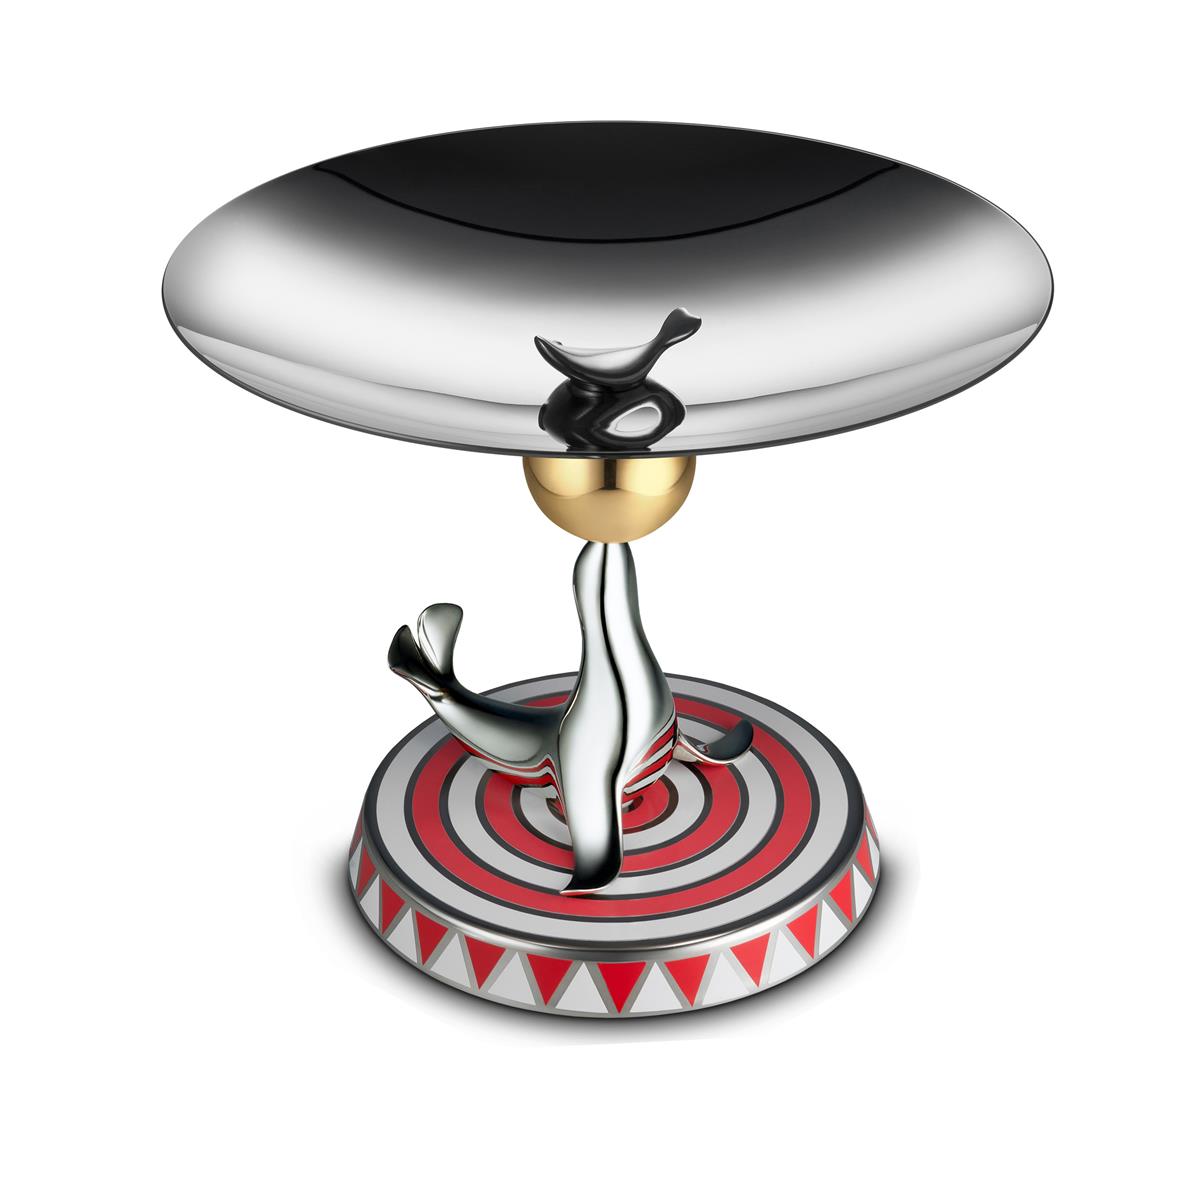 Alessi-The Seal Cake stand in 18/10 stainless steel Limited series of 999 numbered pieces